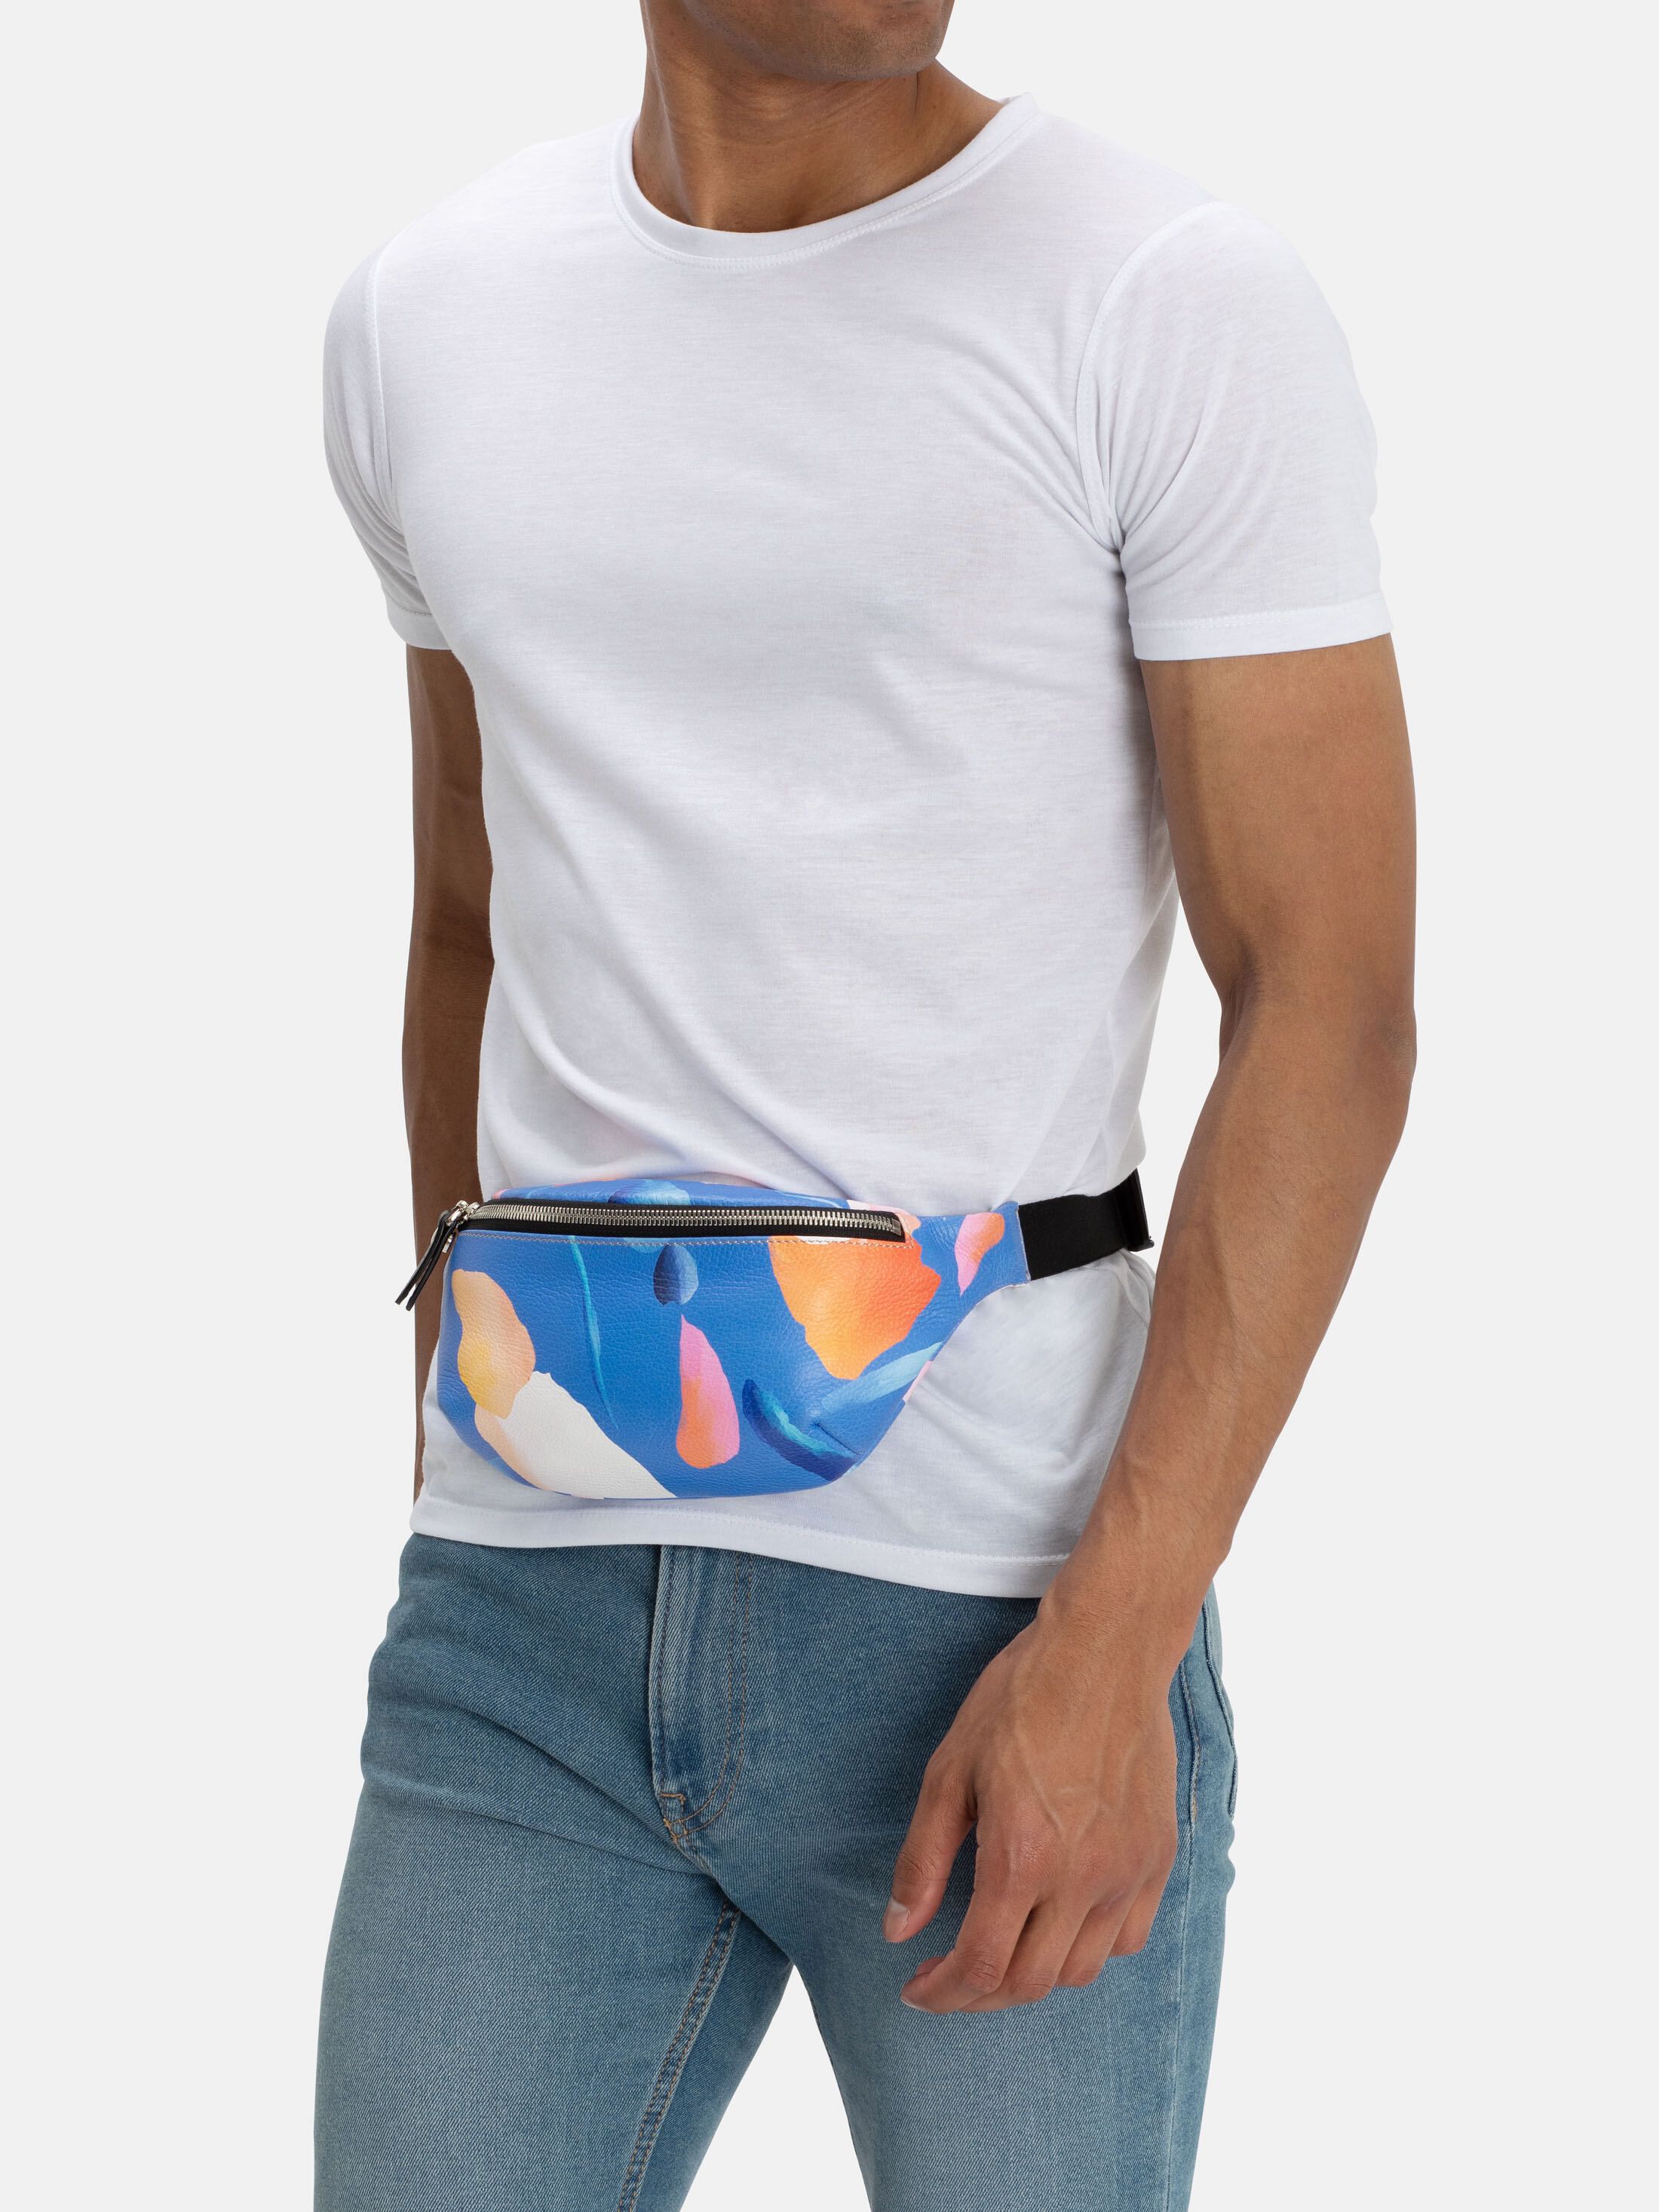 design your own fanny pack with pattern